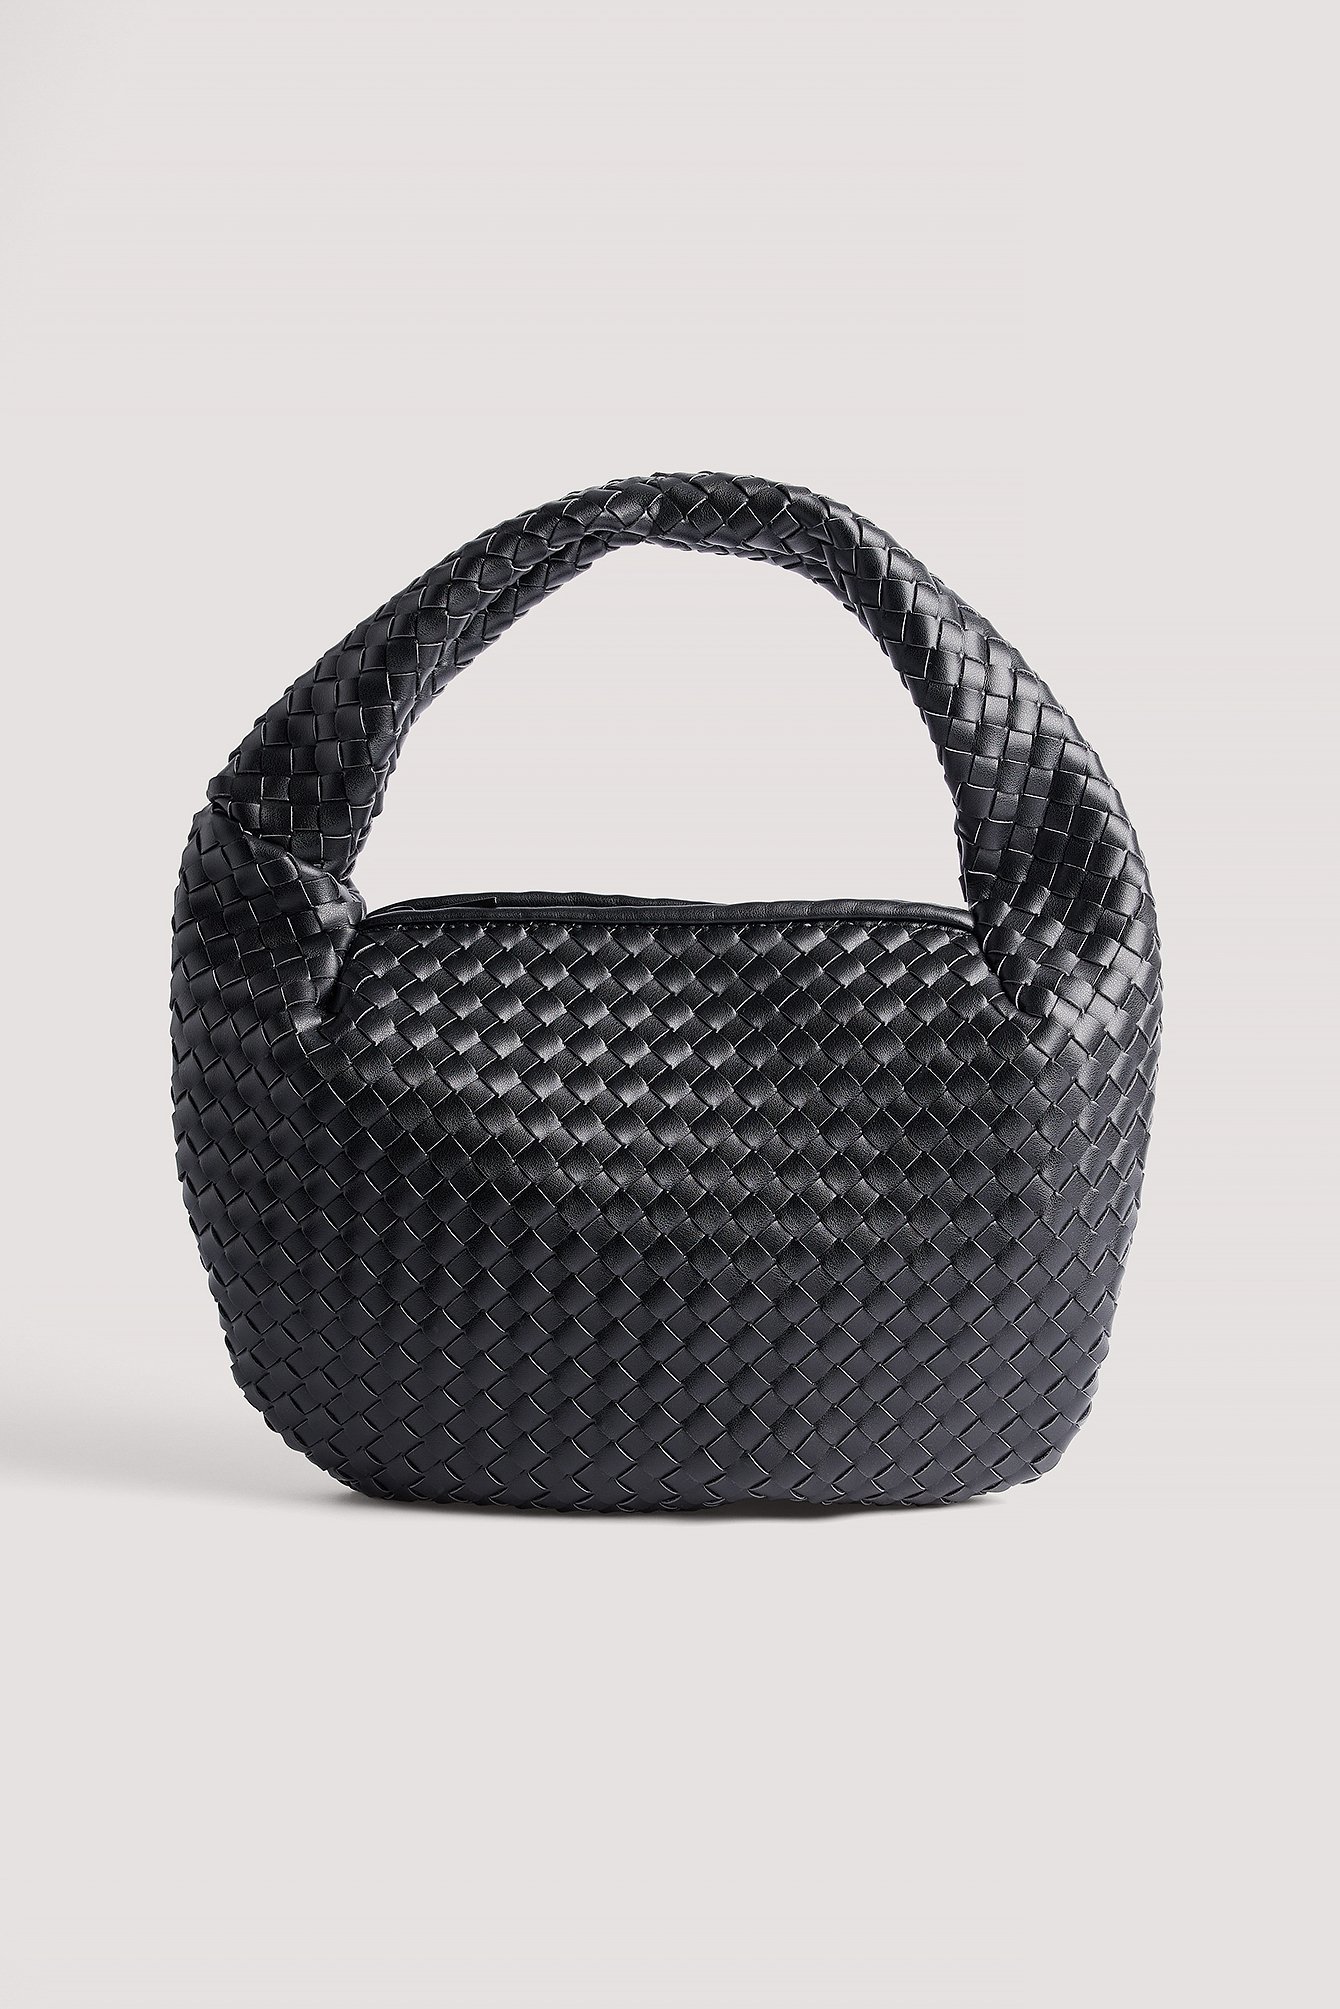  Mai Woven Bag Strap - Black & White with Black Leather